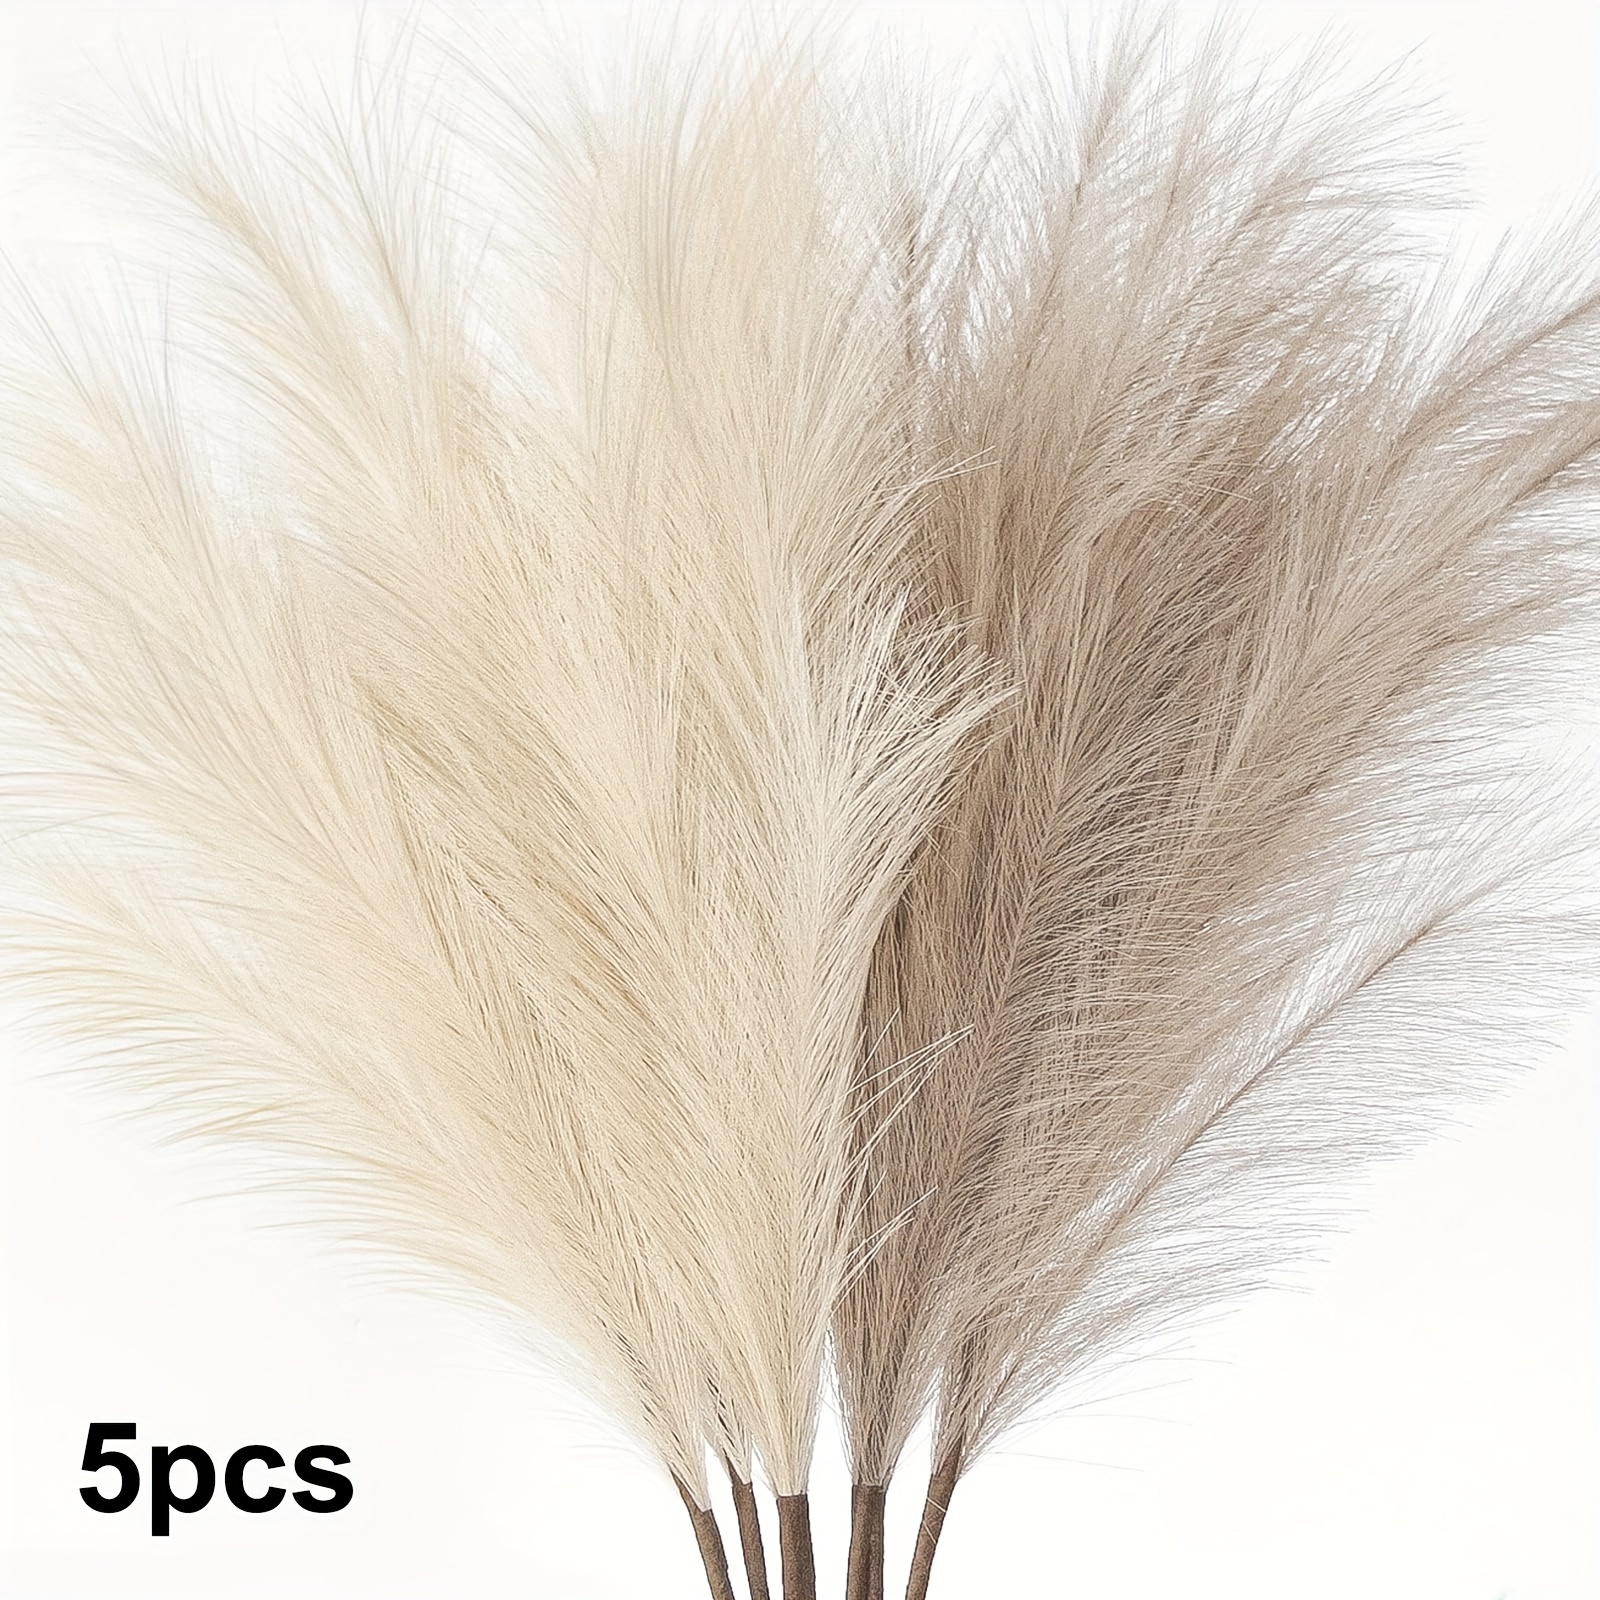 

5pcs Faux 38inch Pampas Grass Large Tall Fluffy Artificial Fake Flower Bedroom Decor Boho Decor Bulrush Reed Grass For Vase Filler Farmhouse Home Wedding Decor (3pcs Light Brown And 2pcs Brown Grey)